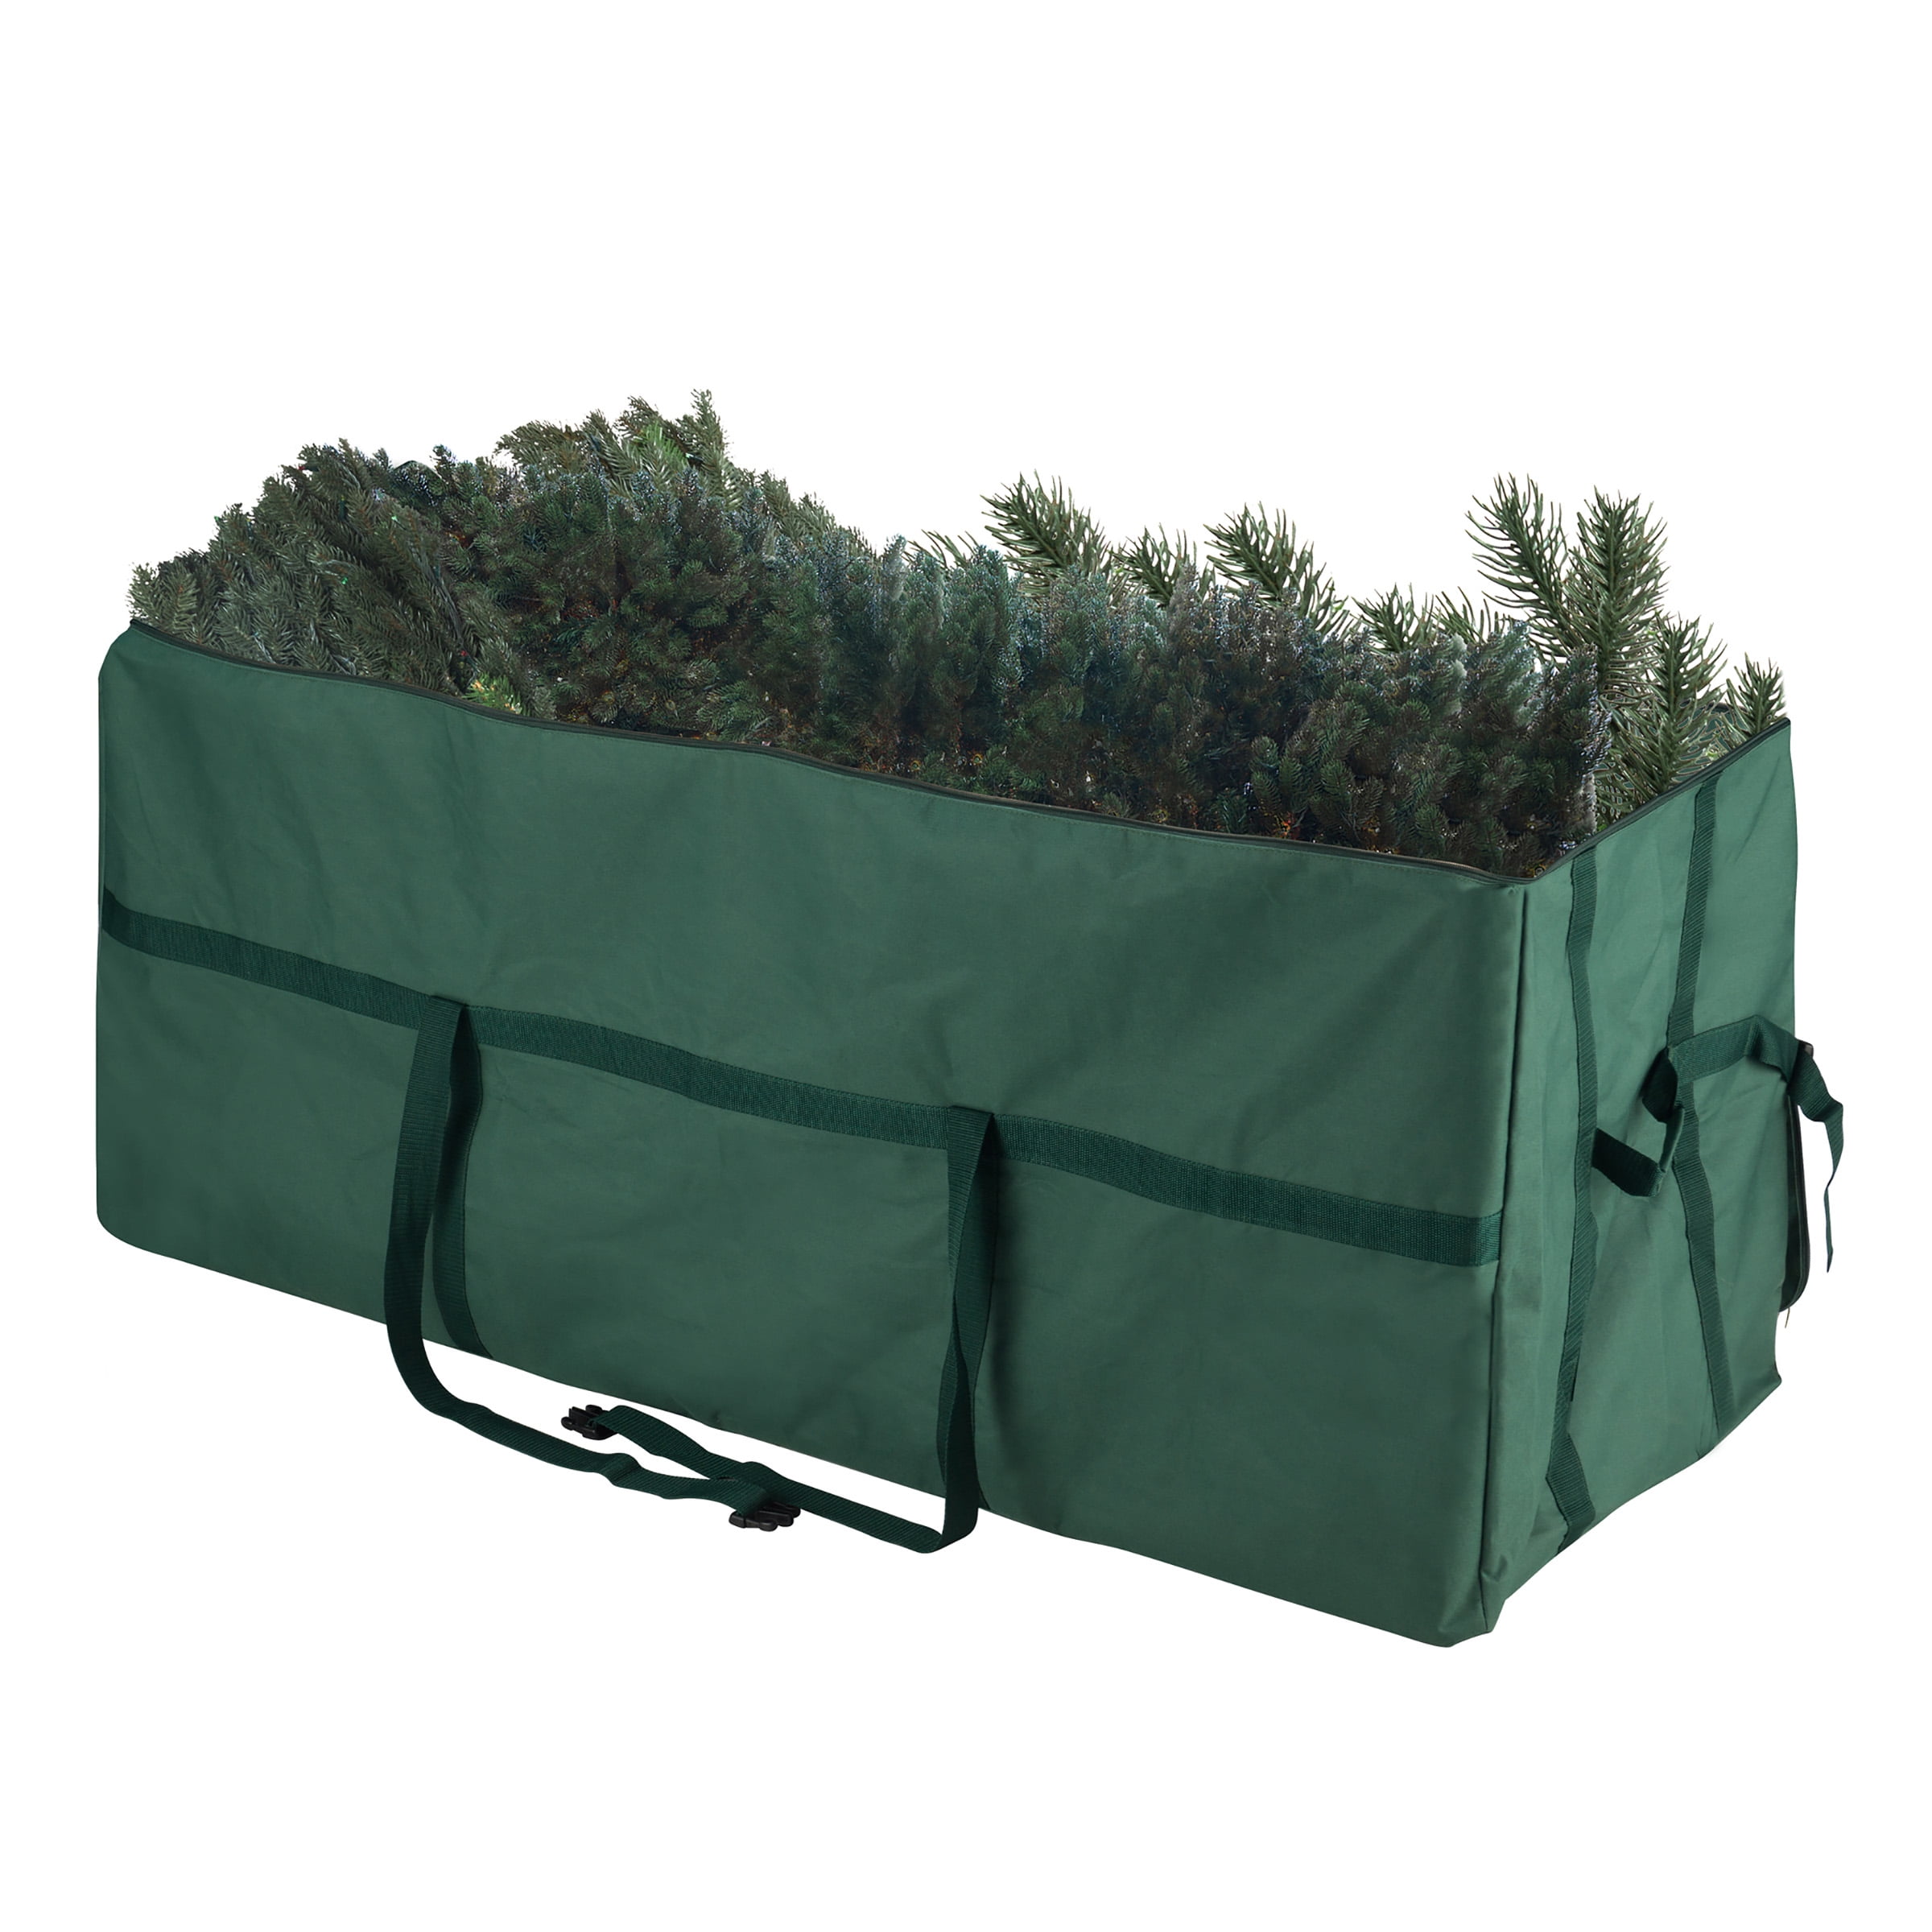 NEW Elf Stor Heavy Duty Canvas Christmas Tree Storage Bag Large For 9 Foot Tree 